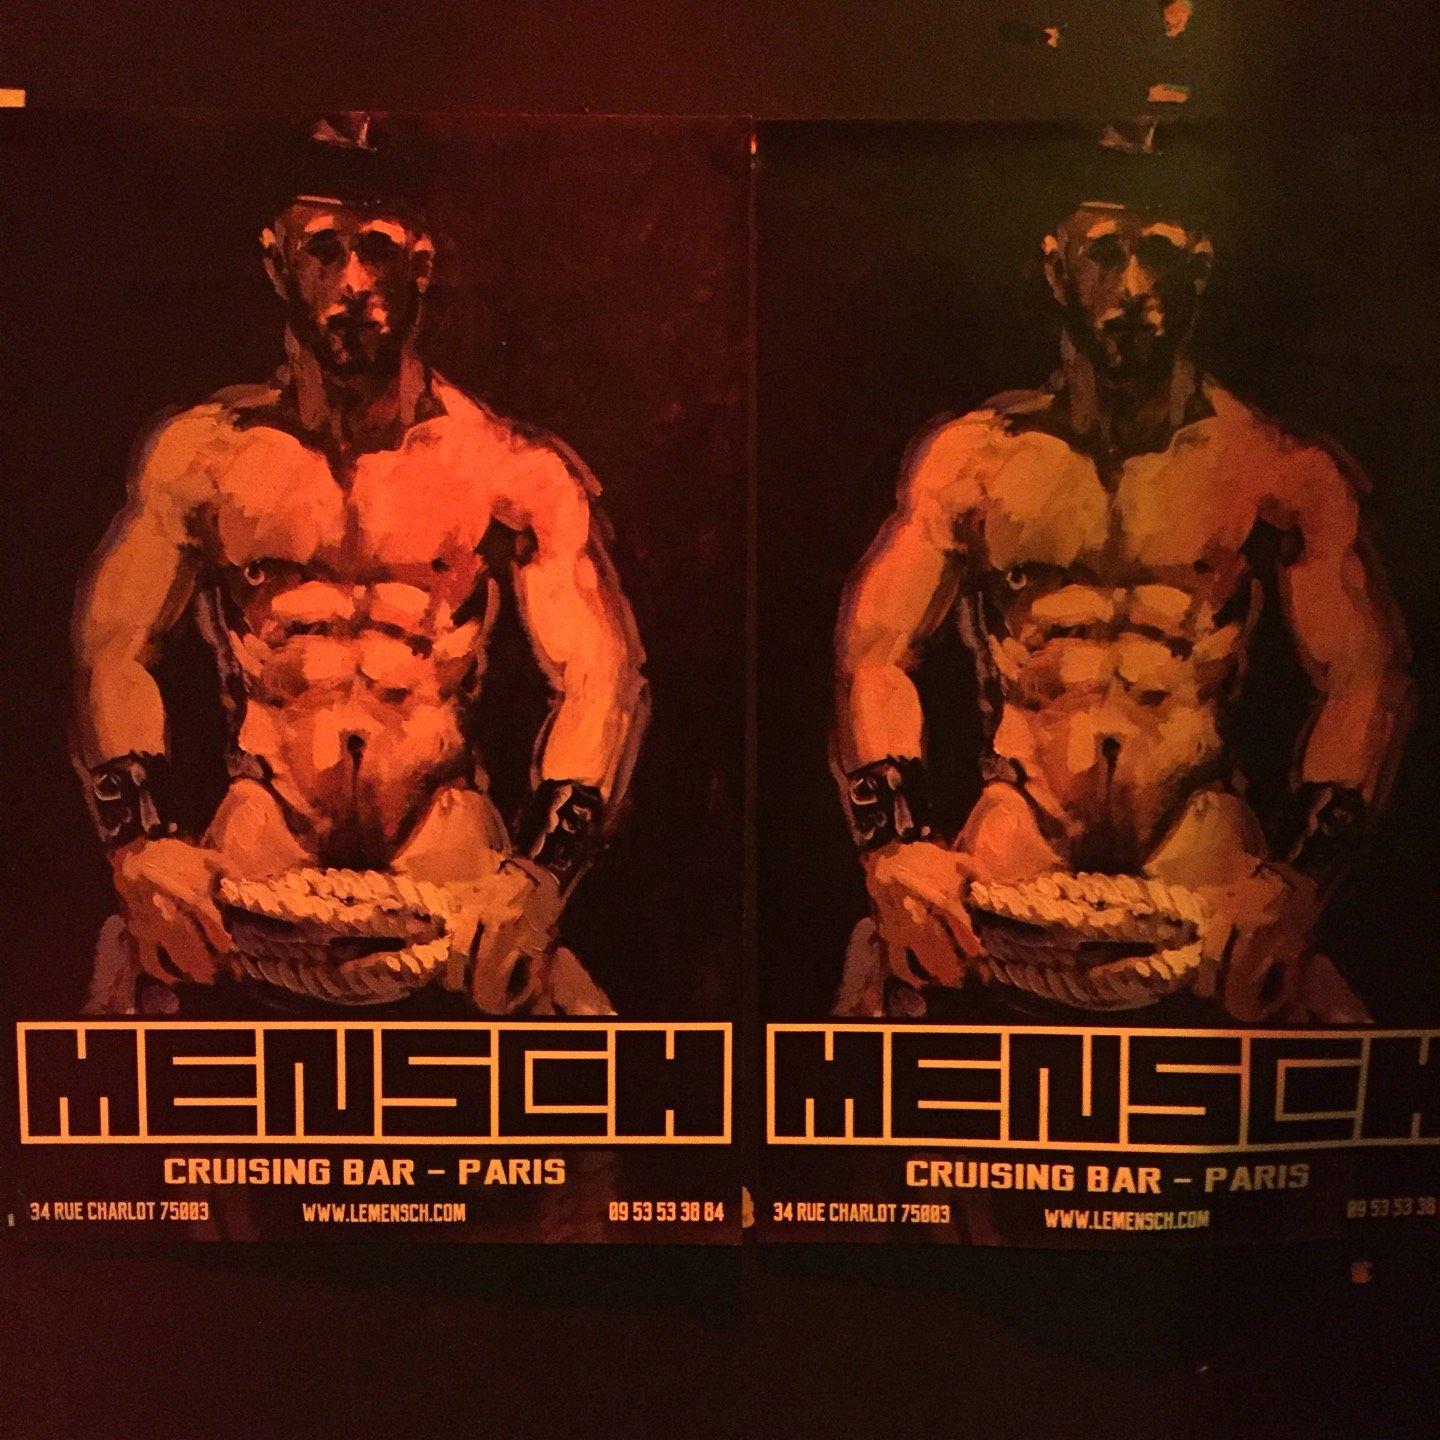 gay fetish poster artwork of shirtless leather daddy with leather kink hat plastered in gay cruising par Le Mensch in paris